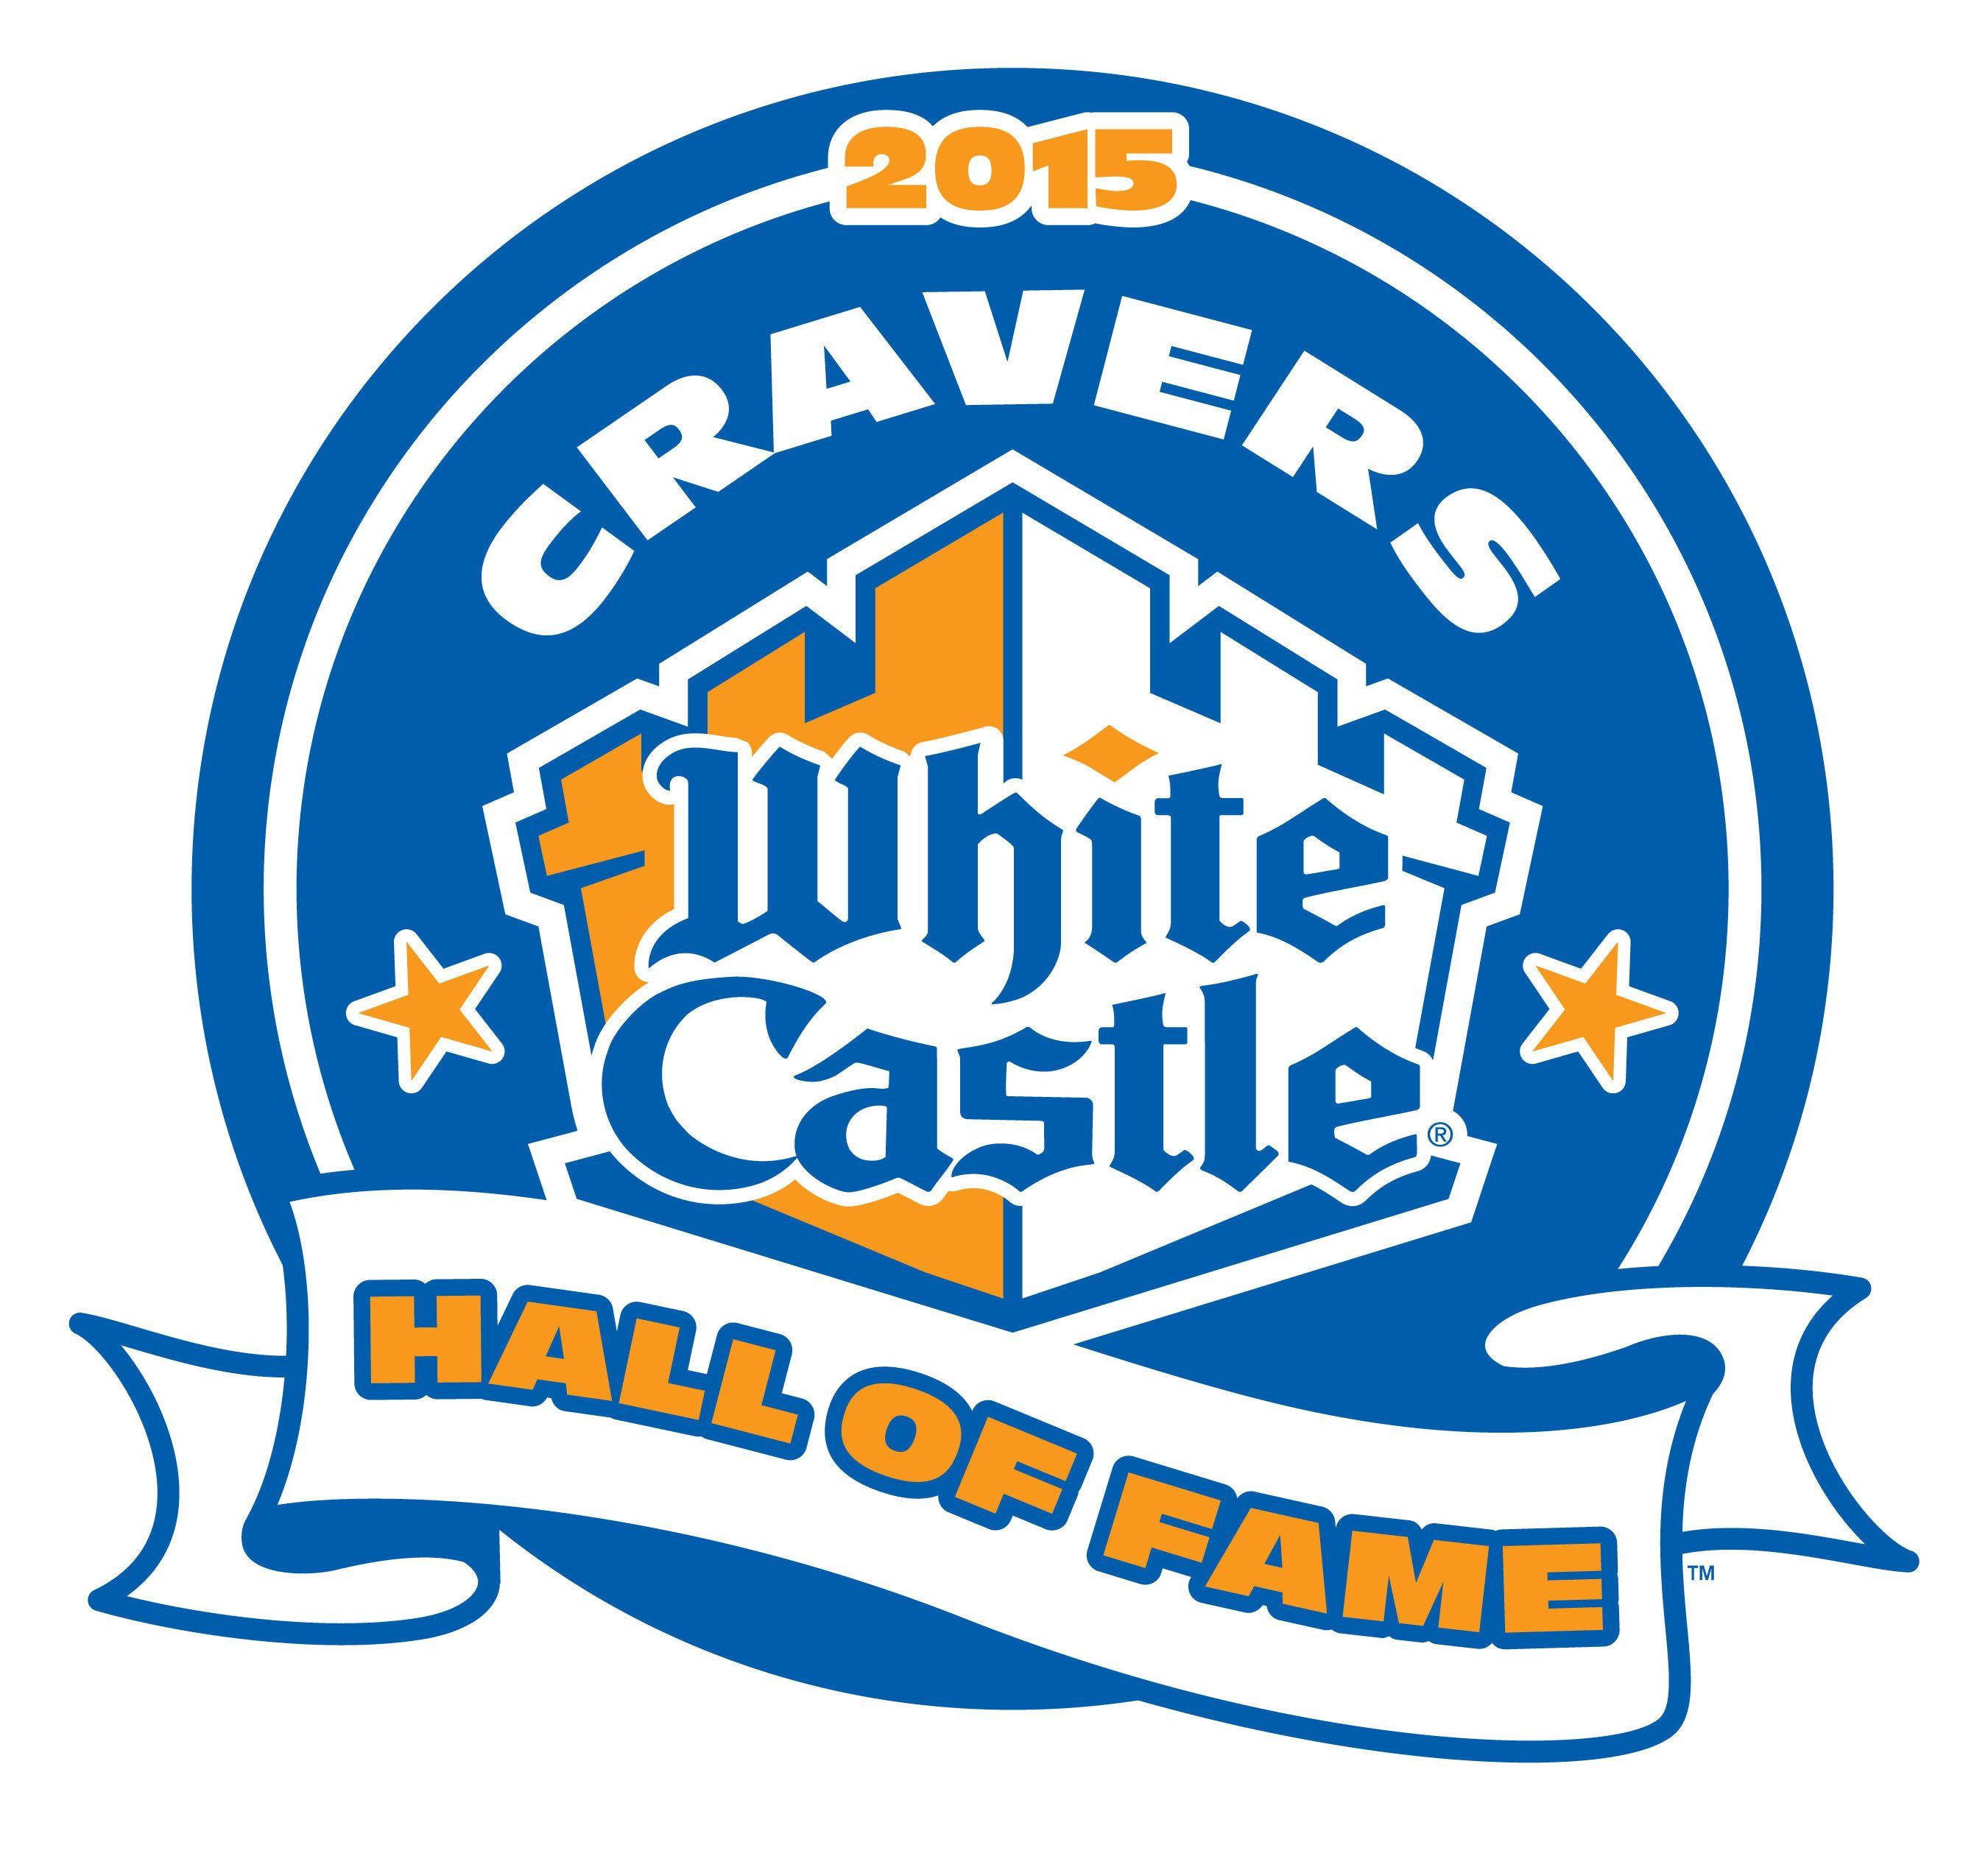 White Castle Logo - A Circus Performer, Boy Scout And Traveling Slider Man Walk Into A